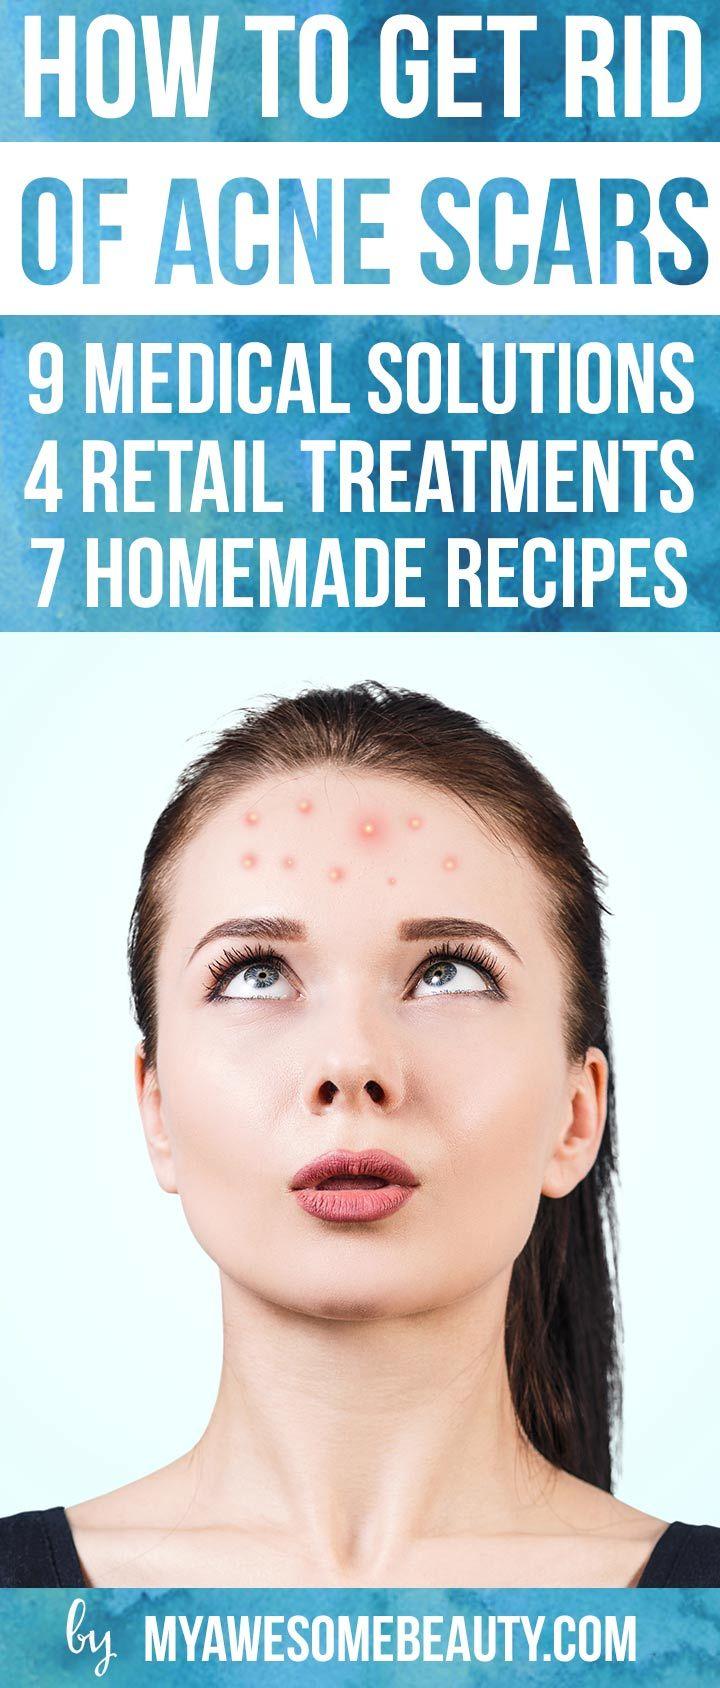 How to get rid of acne effectively